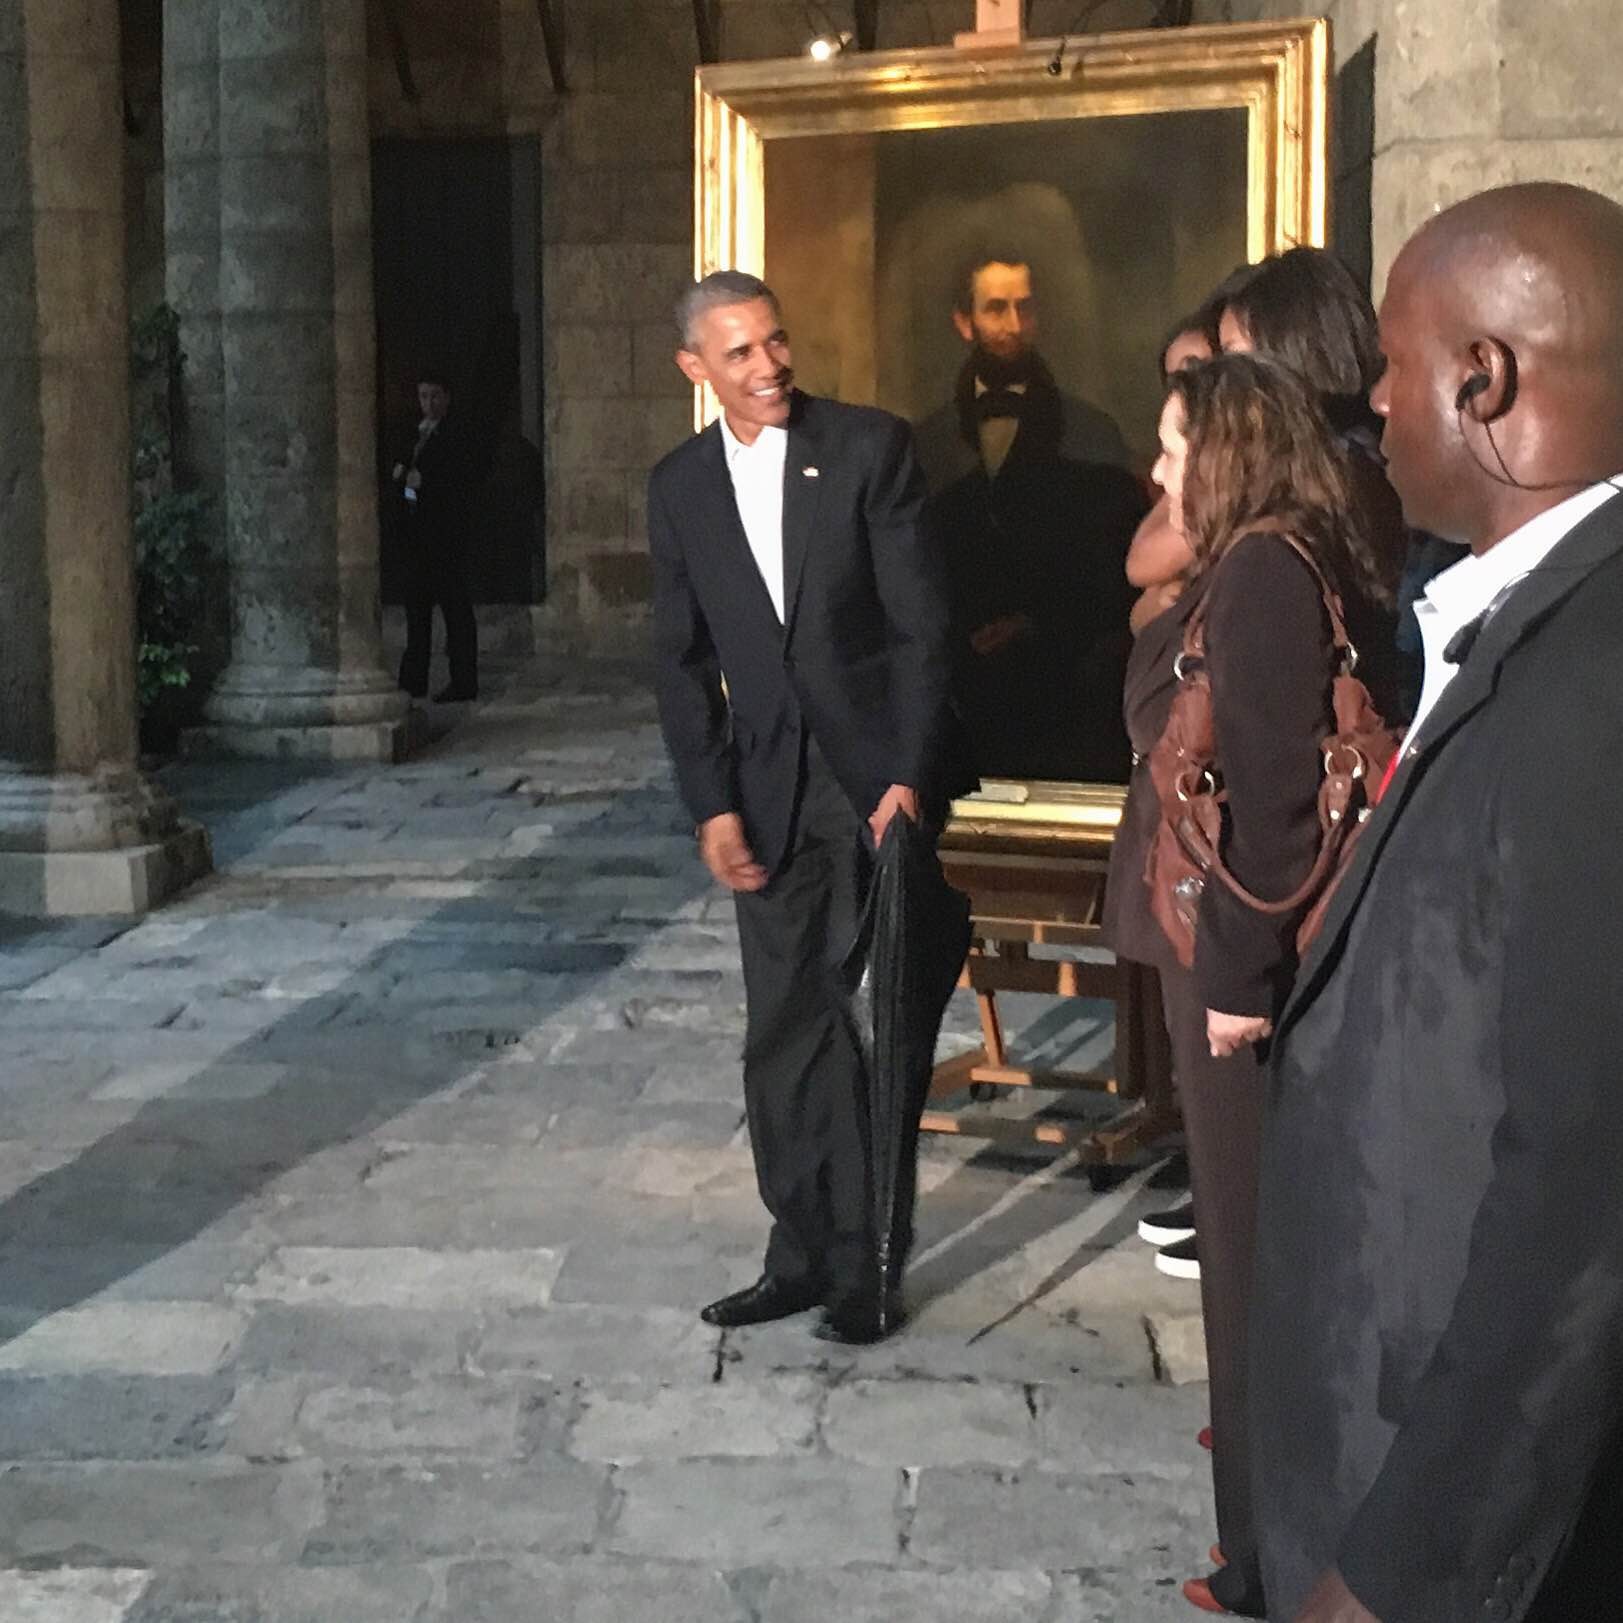 President Obama during his historic visit to Cuba (Pool photo).